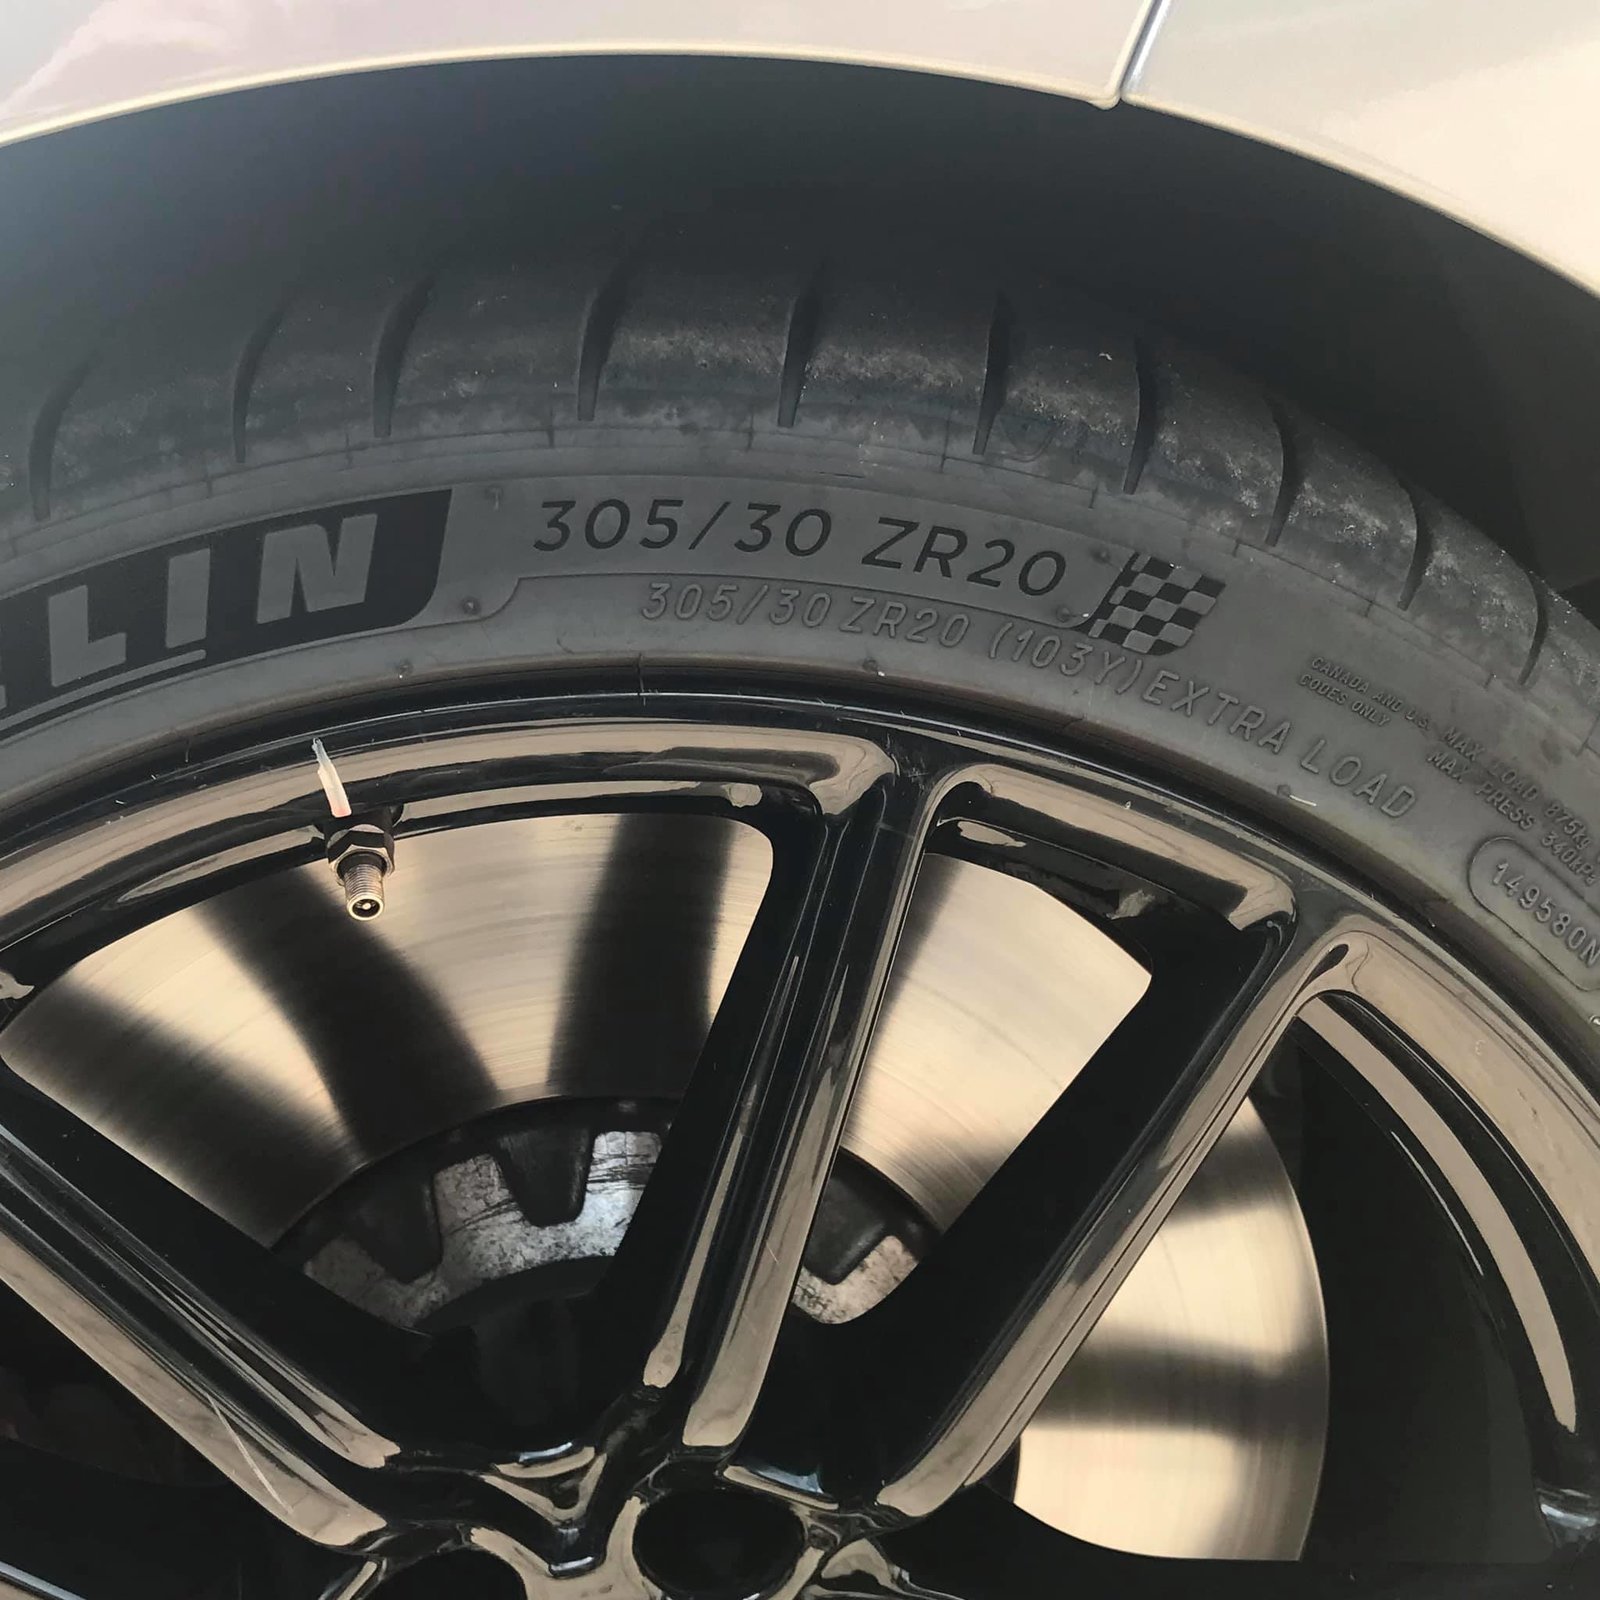 2020 GT500 Base Silver Front Tire Size.jpg